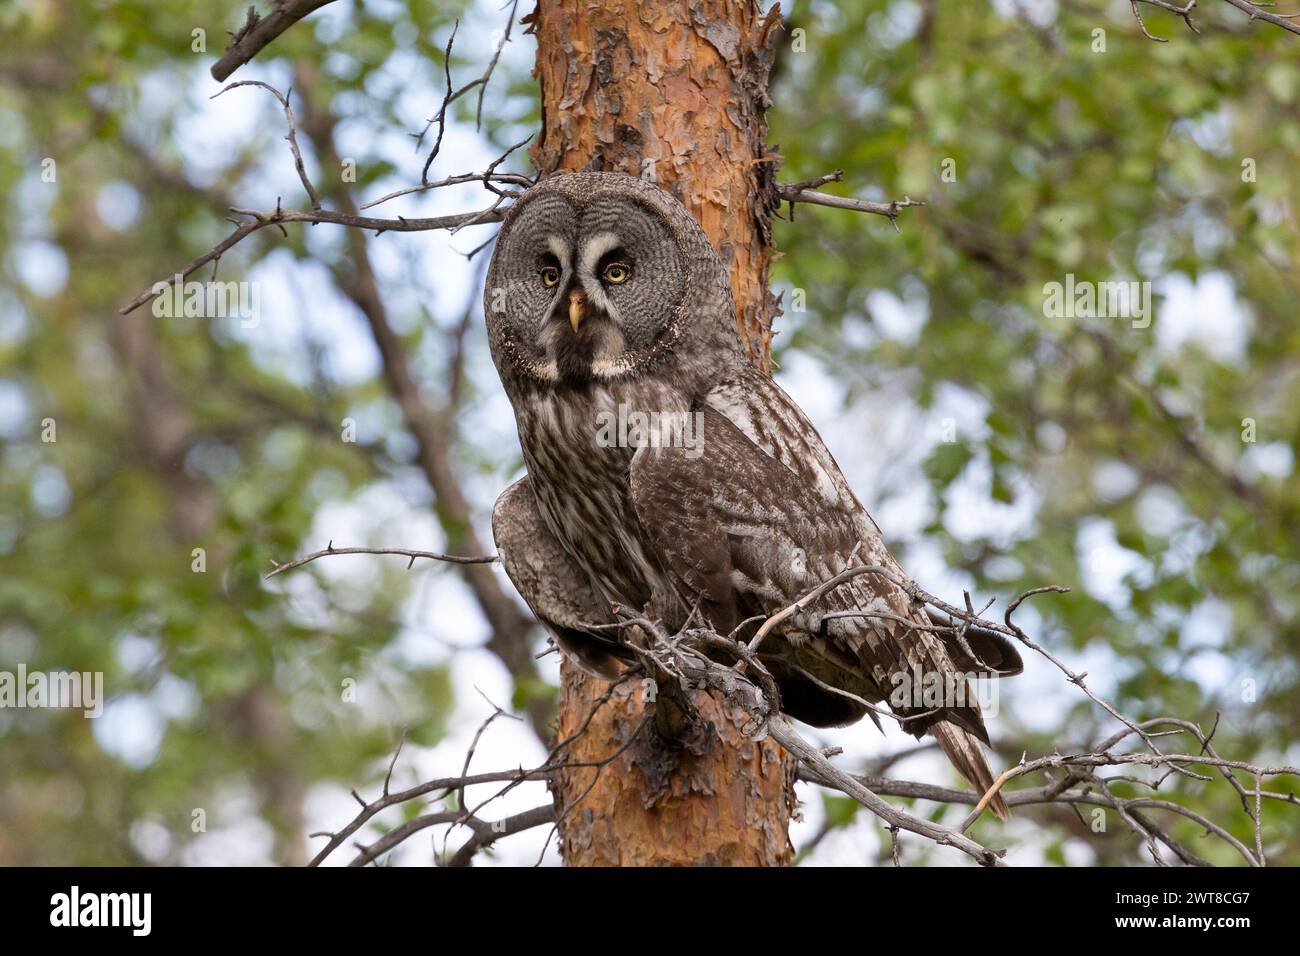 Great gray owl sitting on a tree branch close up Stock Photo